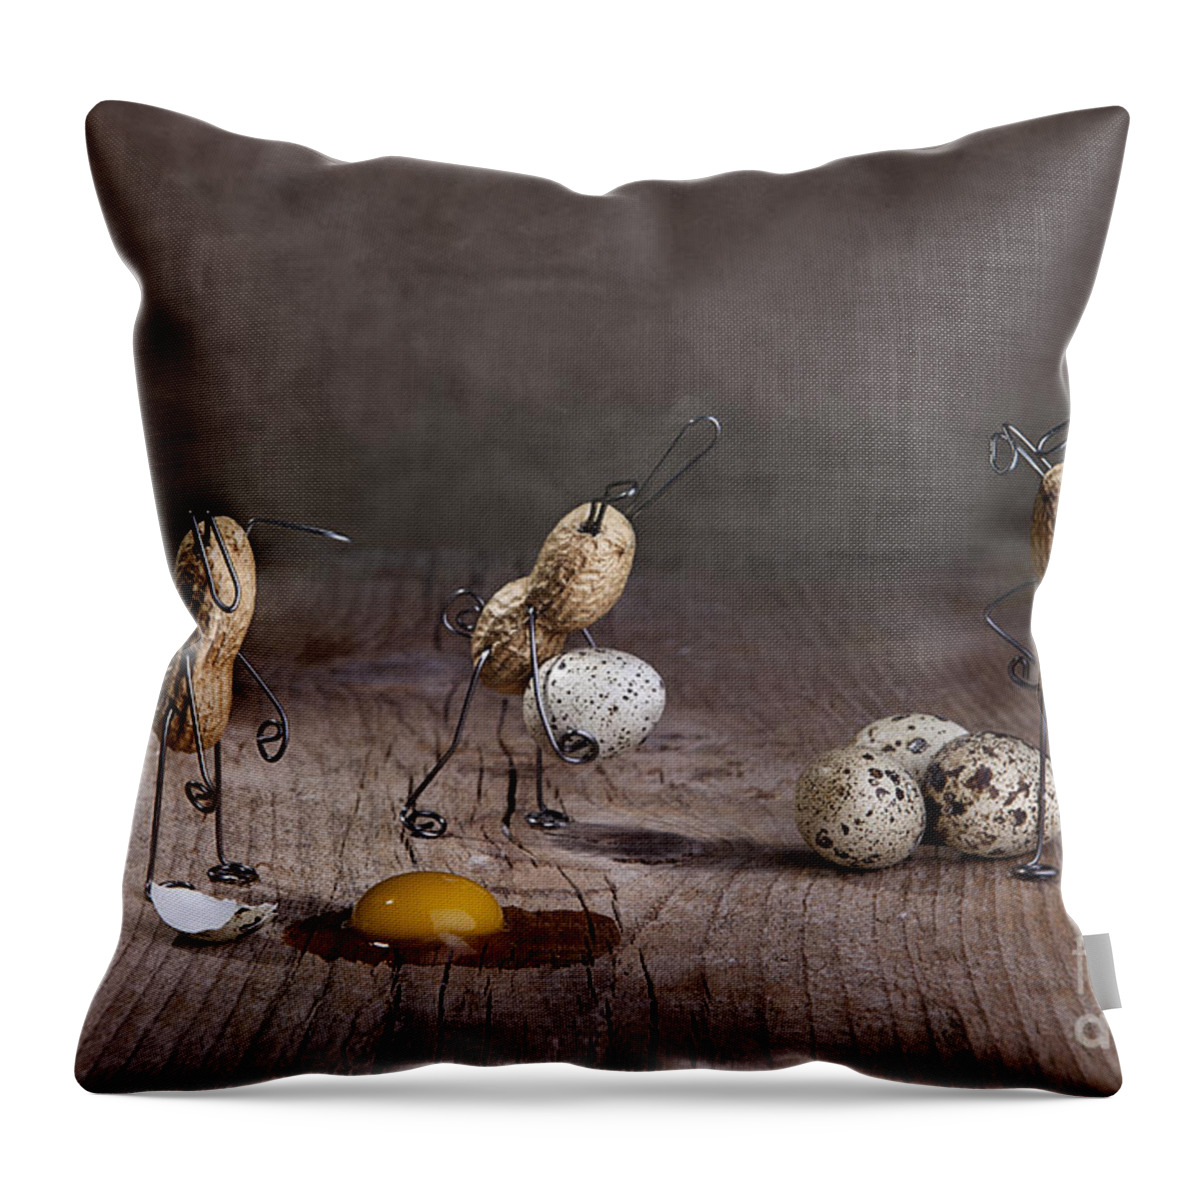 Easter Throw Pillow featuring the photograph Simple Things Easter 06 by Nailia Schwarz